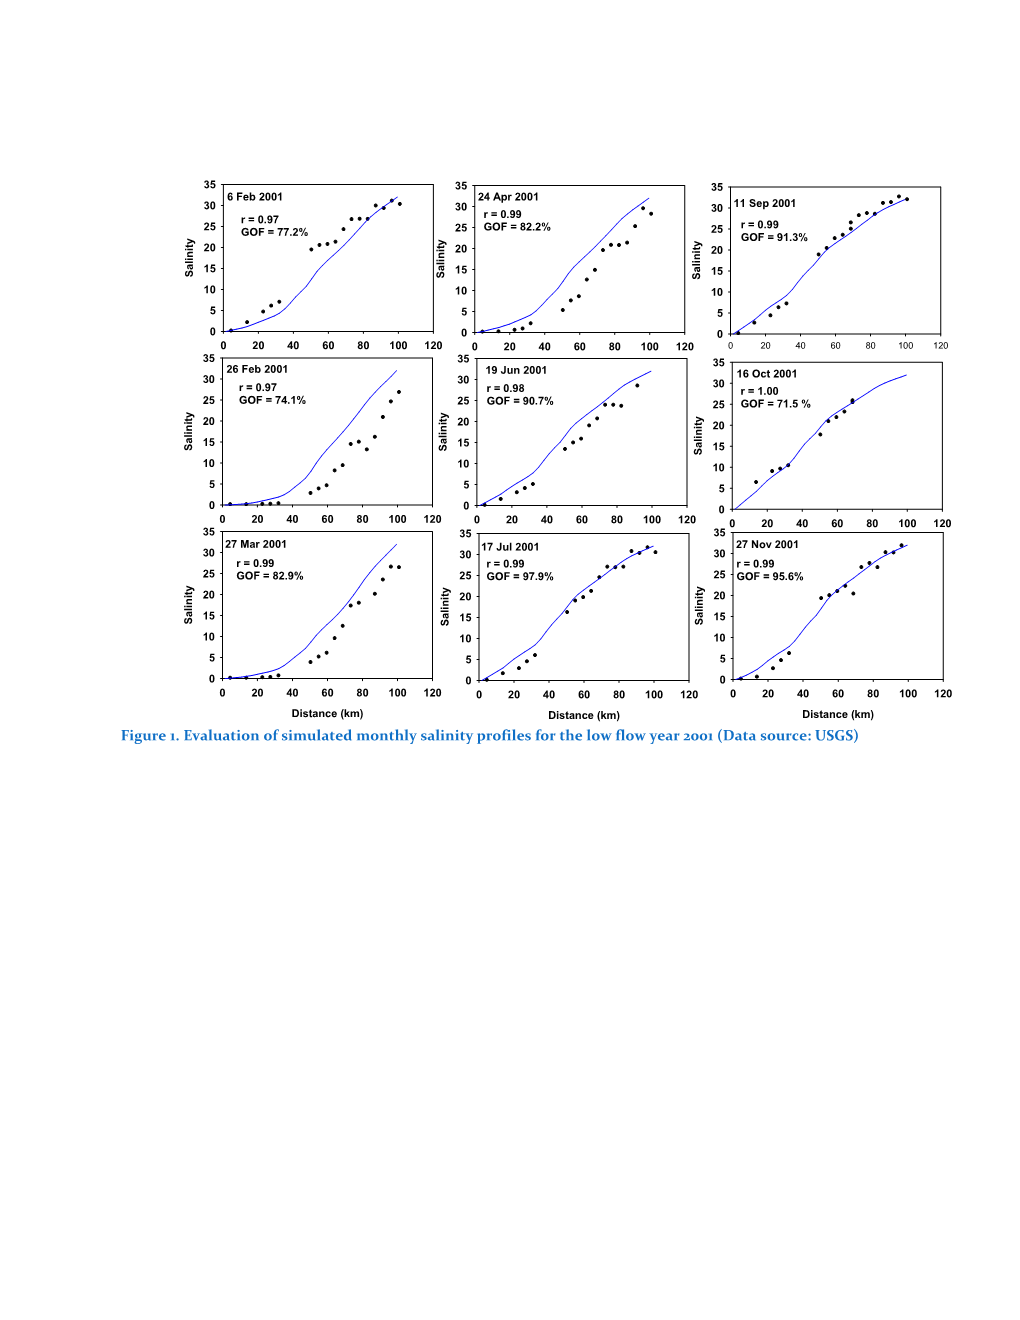 Figure 1.Evaluation of Simulated Monthly Salinity Profiles for the Low Flow Year 2001